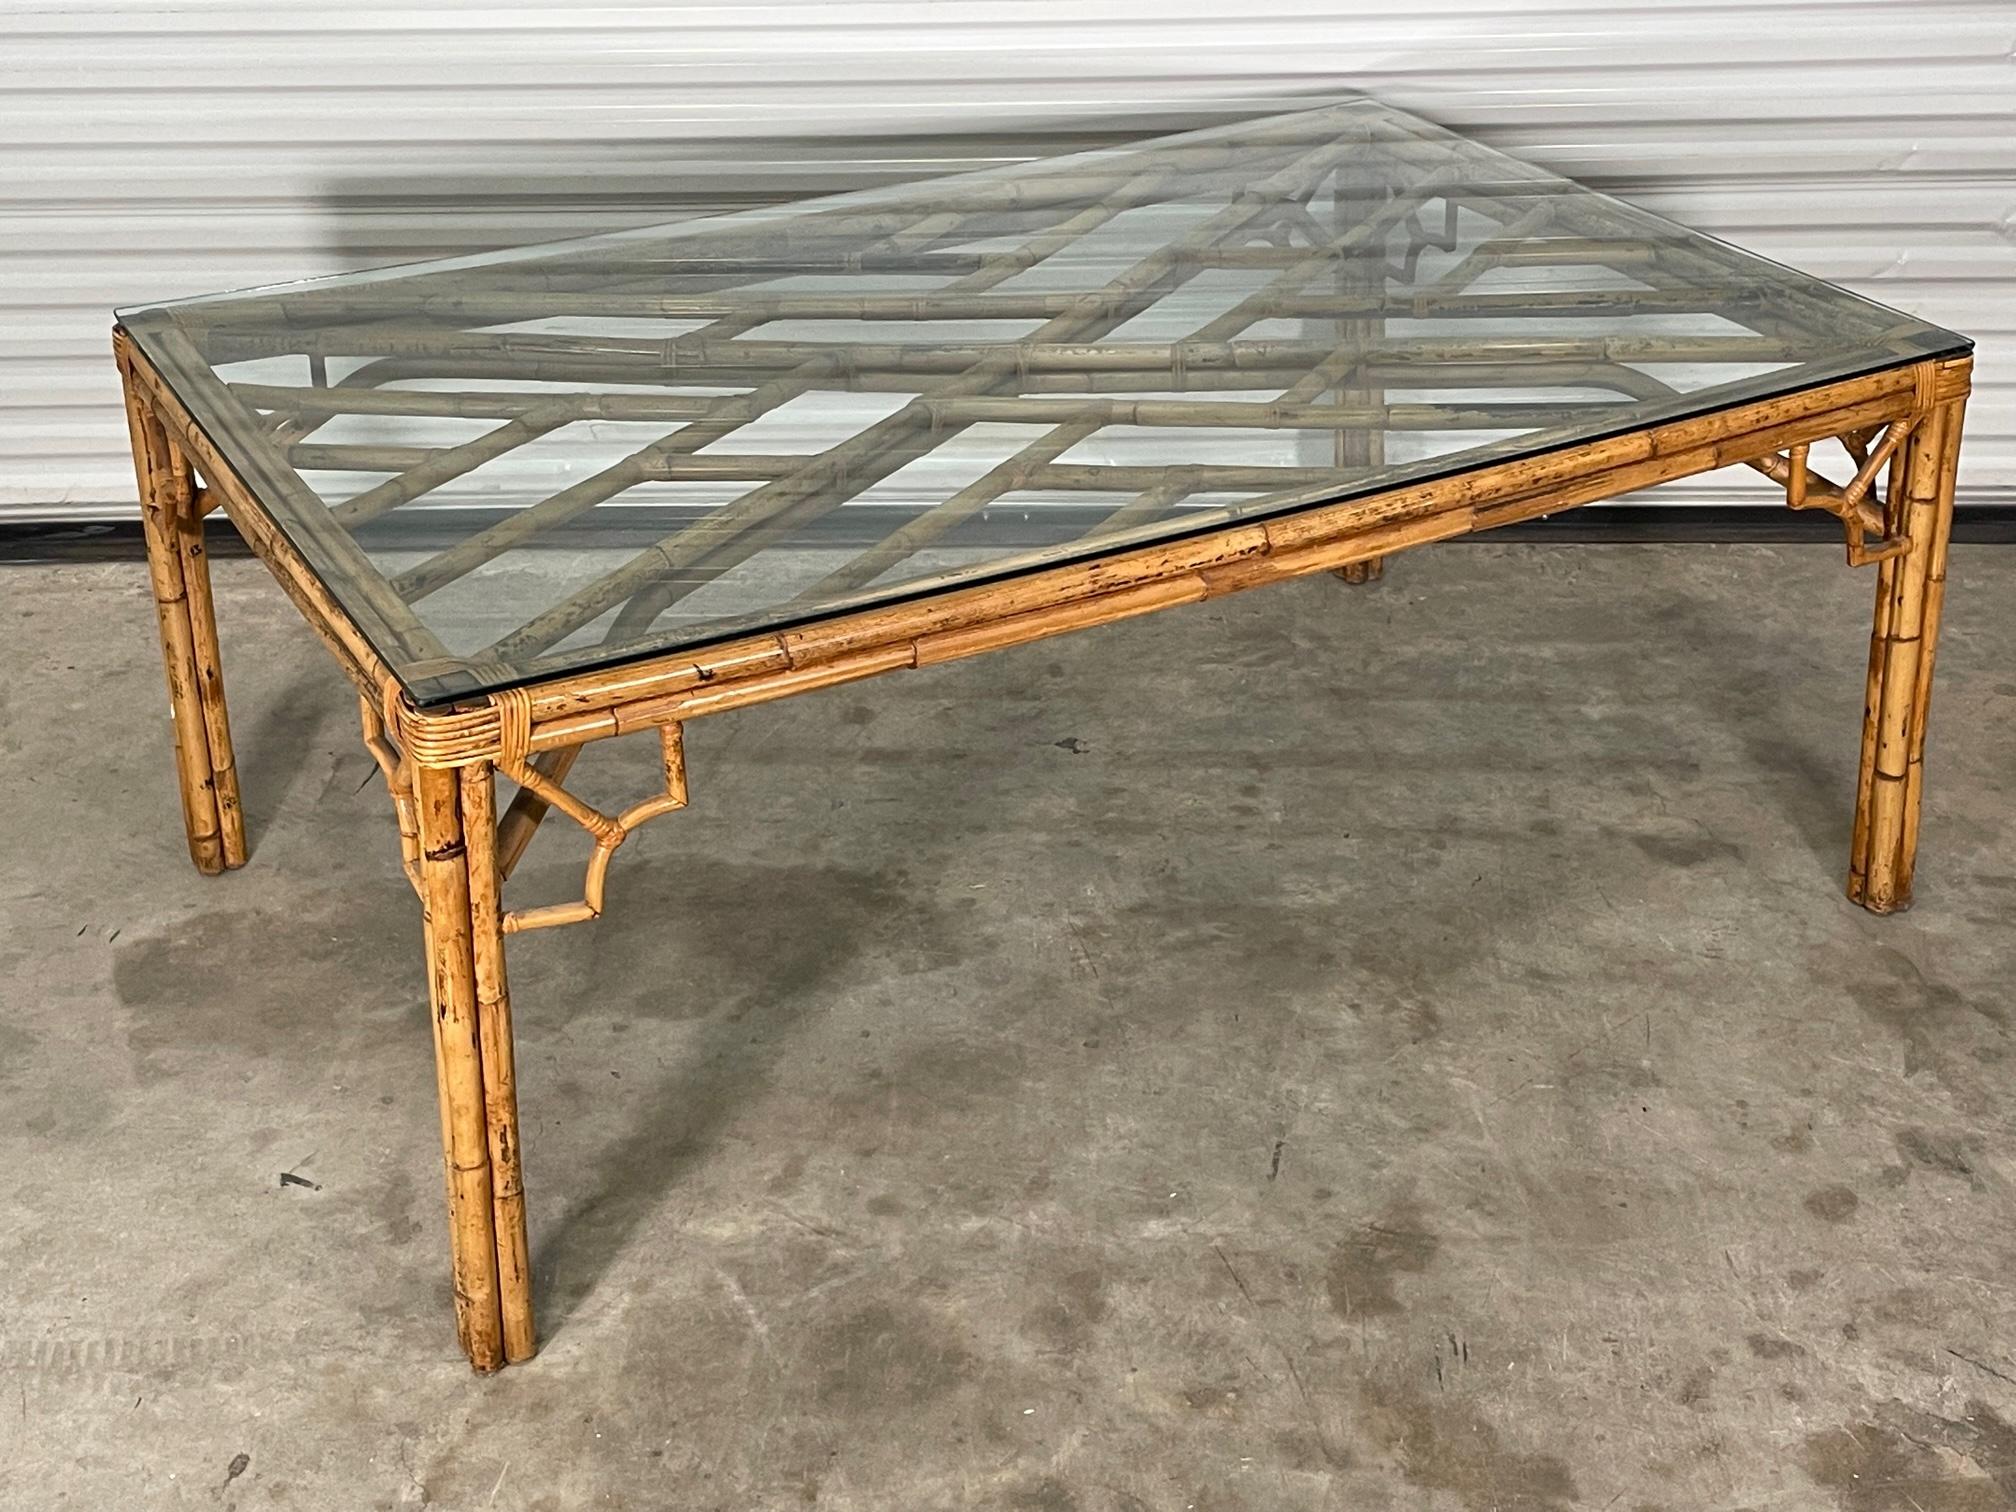 Rattan dining table features fretwork in an Asian chinoiserie design and glass top. Good condition with imperfections consistent with age. May exhibit scuffs, marks, or wear, see photos for details.

 